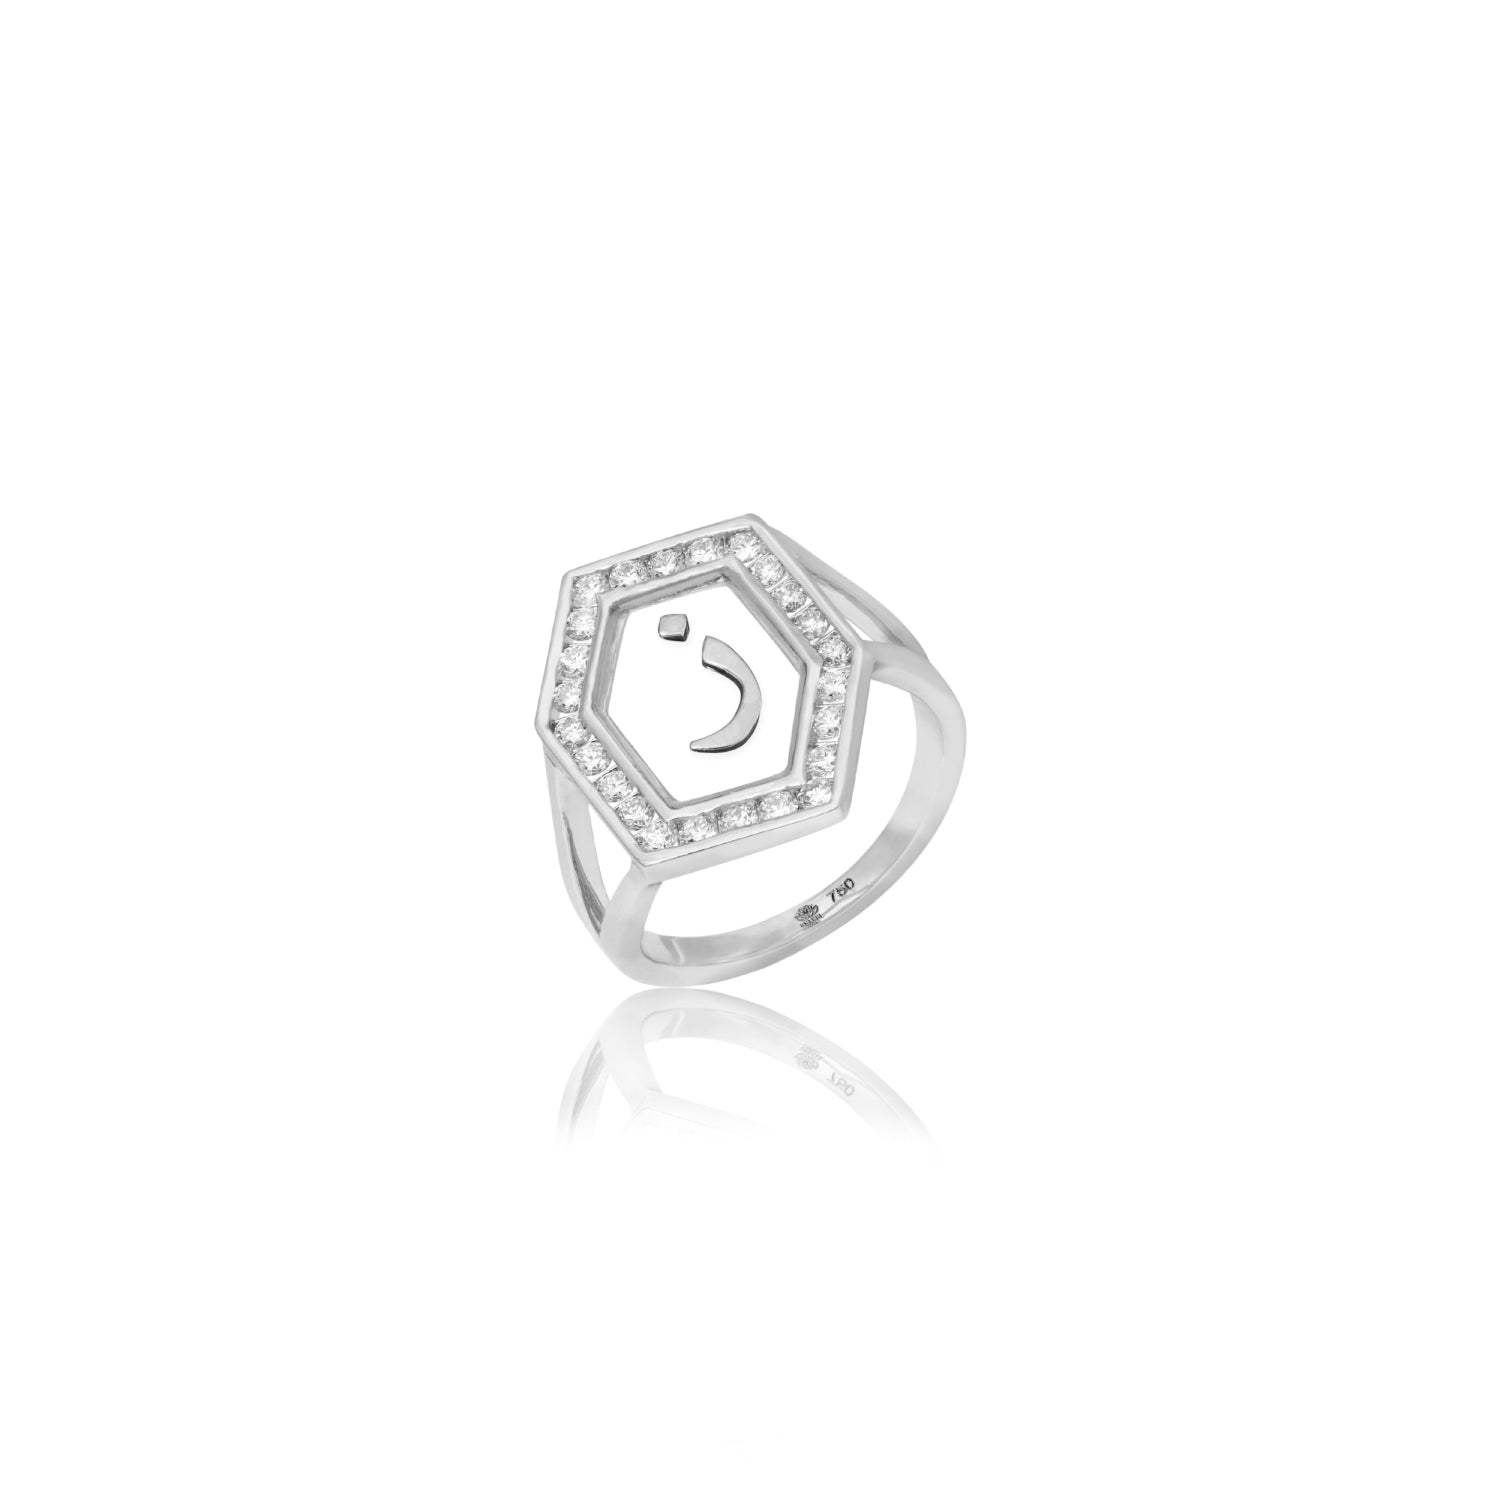 Qamoos 1.0 Letter ز Diamond Ring in White Gold